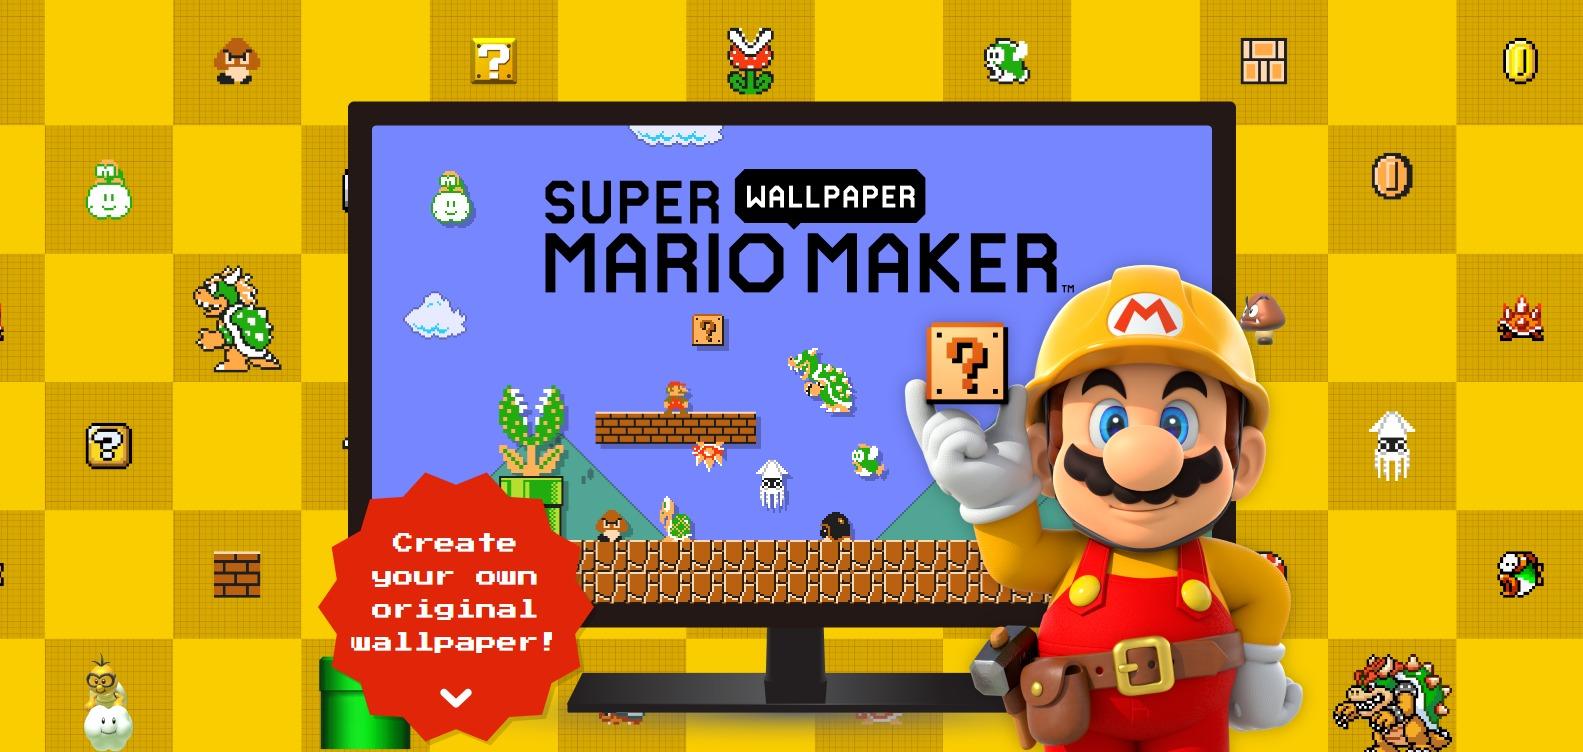 Super Mario Maker wallpaper creation site now up in English